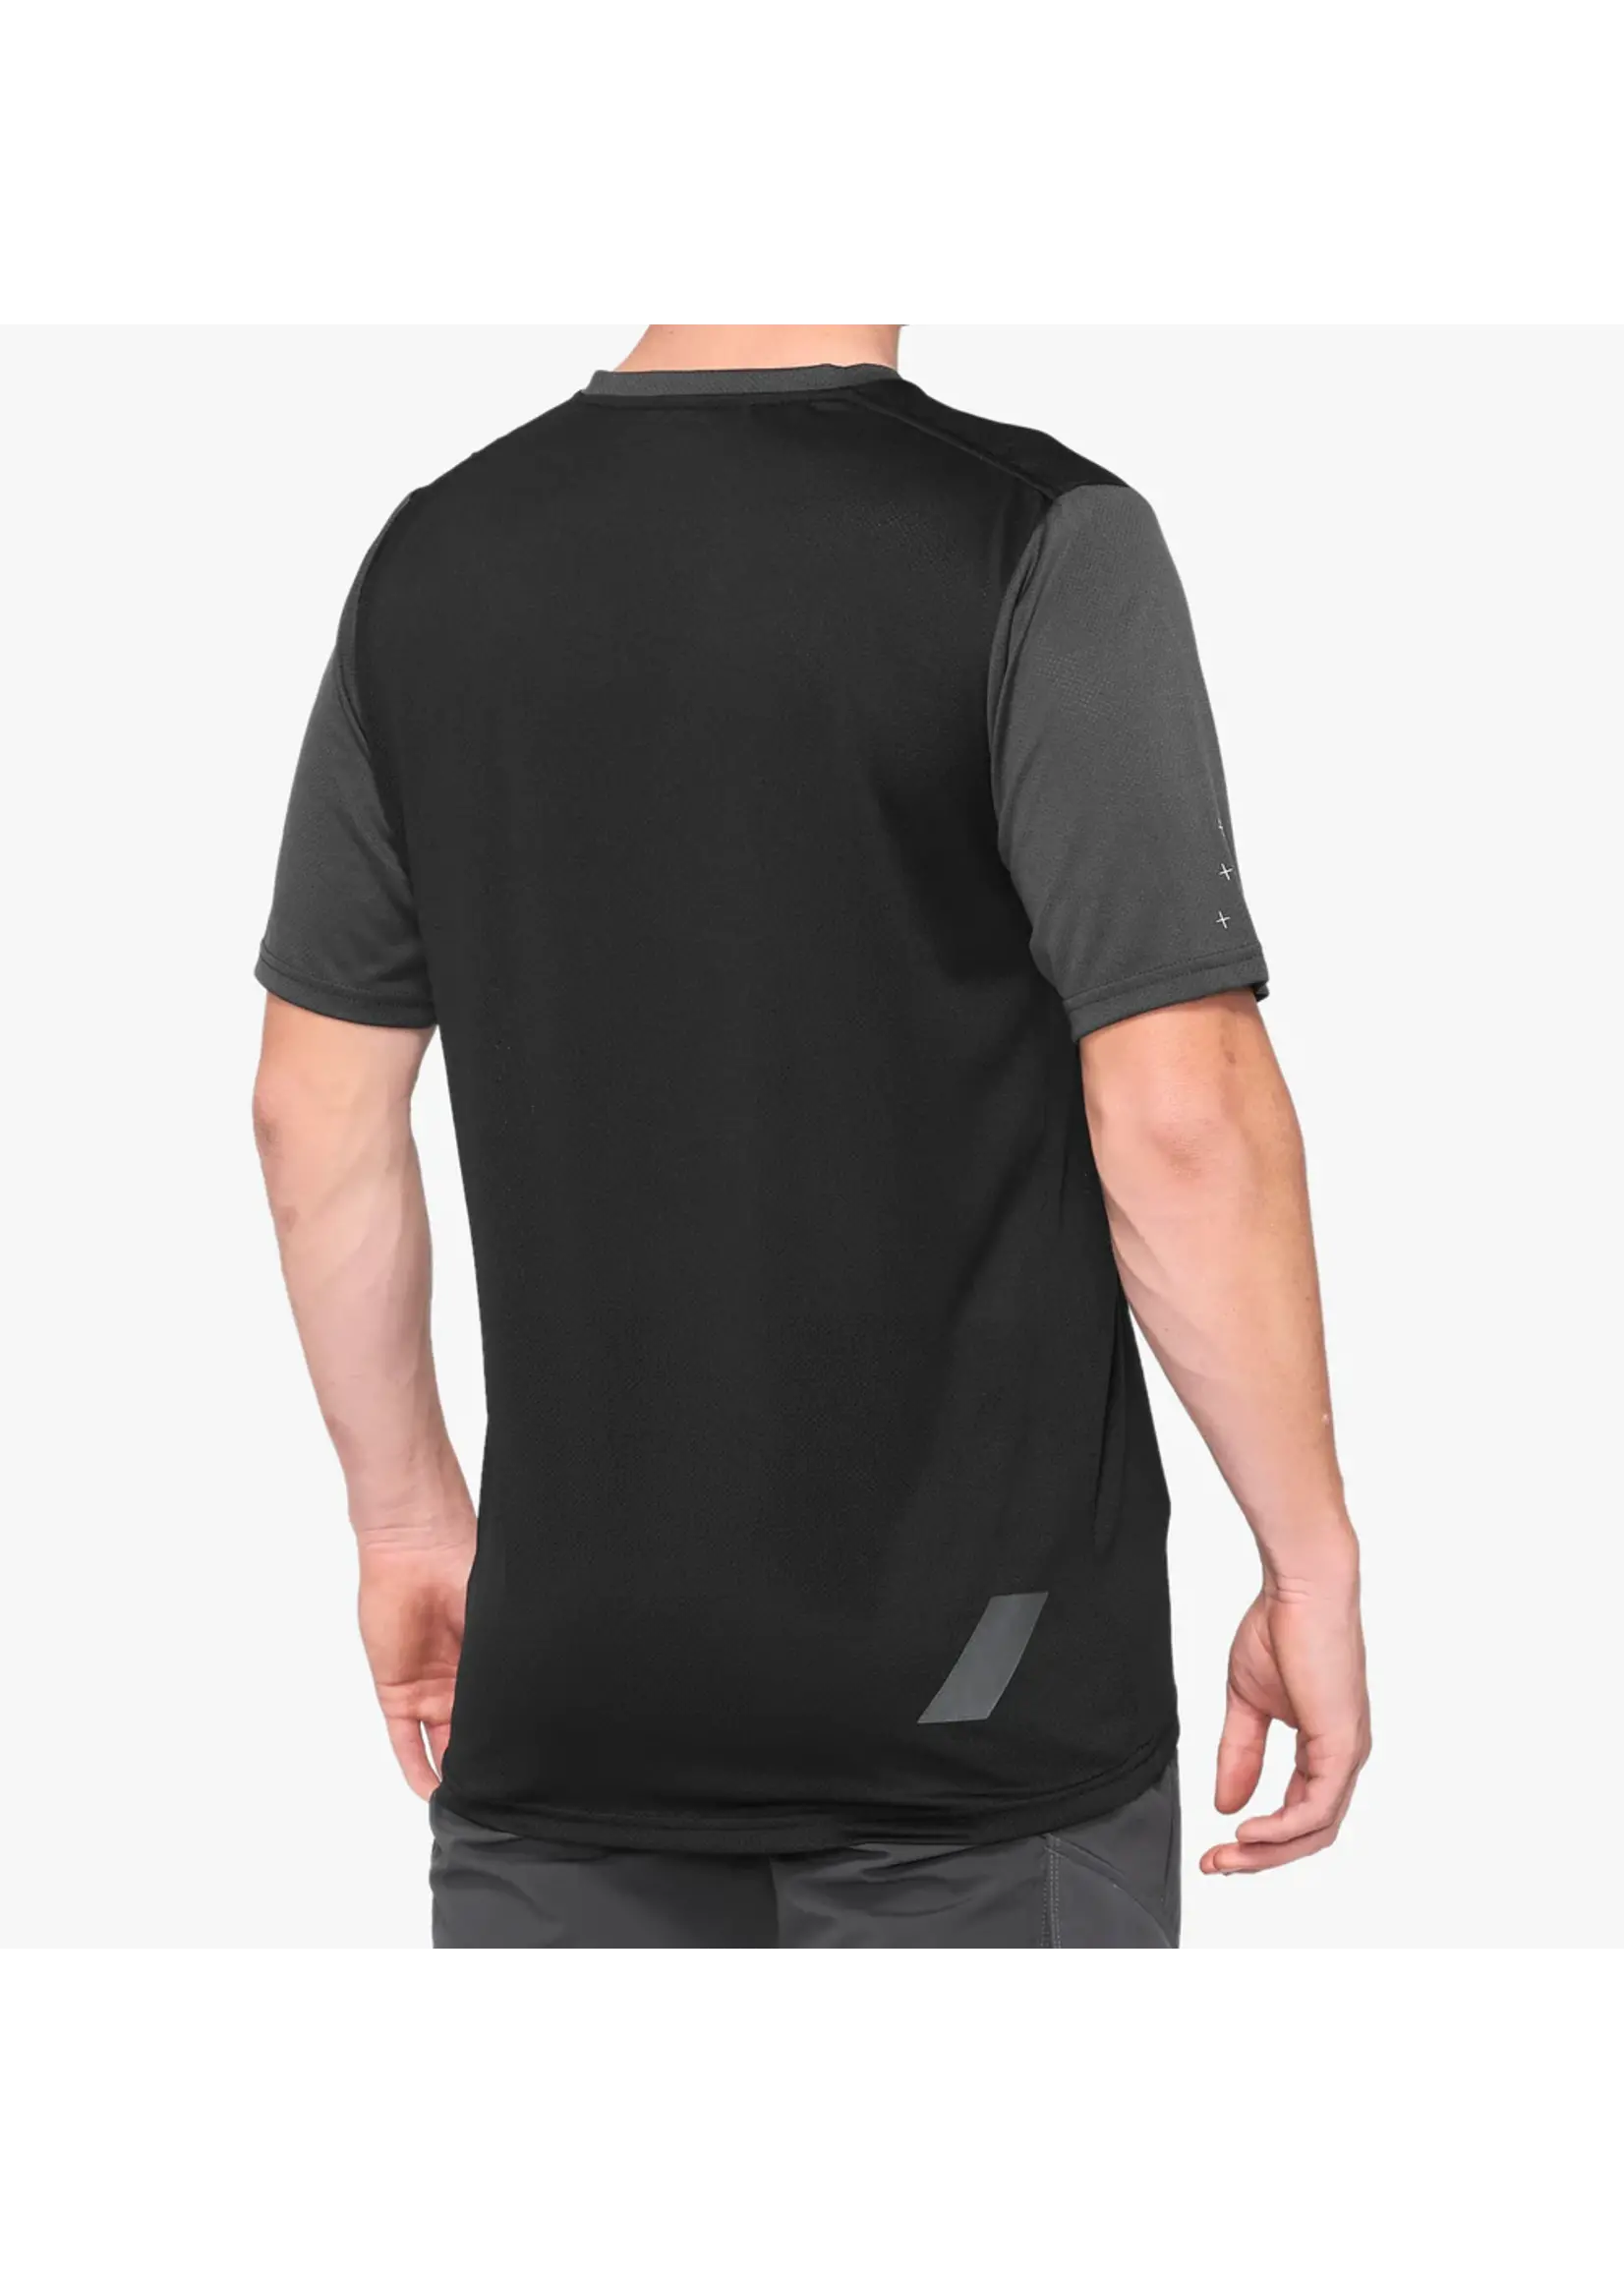 100 Percent 100% RIDECAMP ALL MOUNTAIN SHORT SLEEVE JERSEY BLACK/CHARCOAL